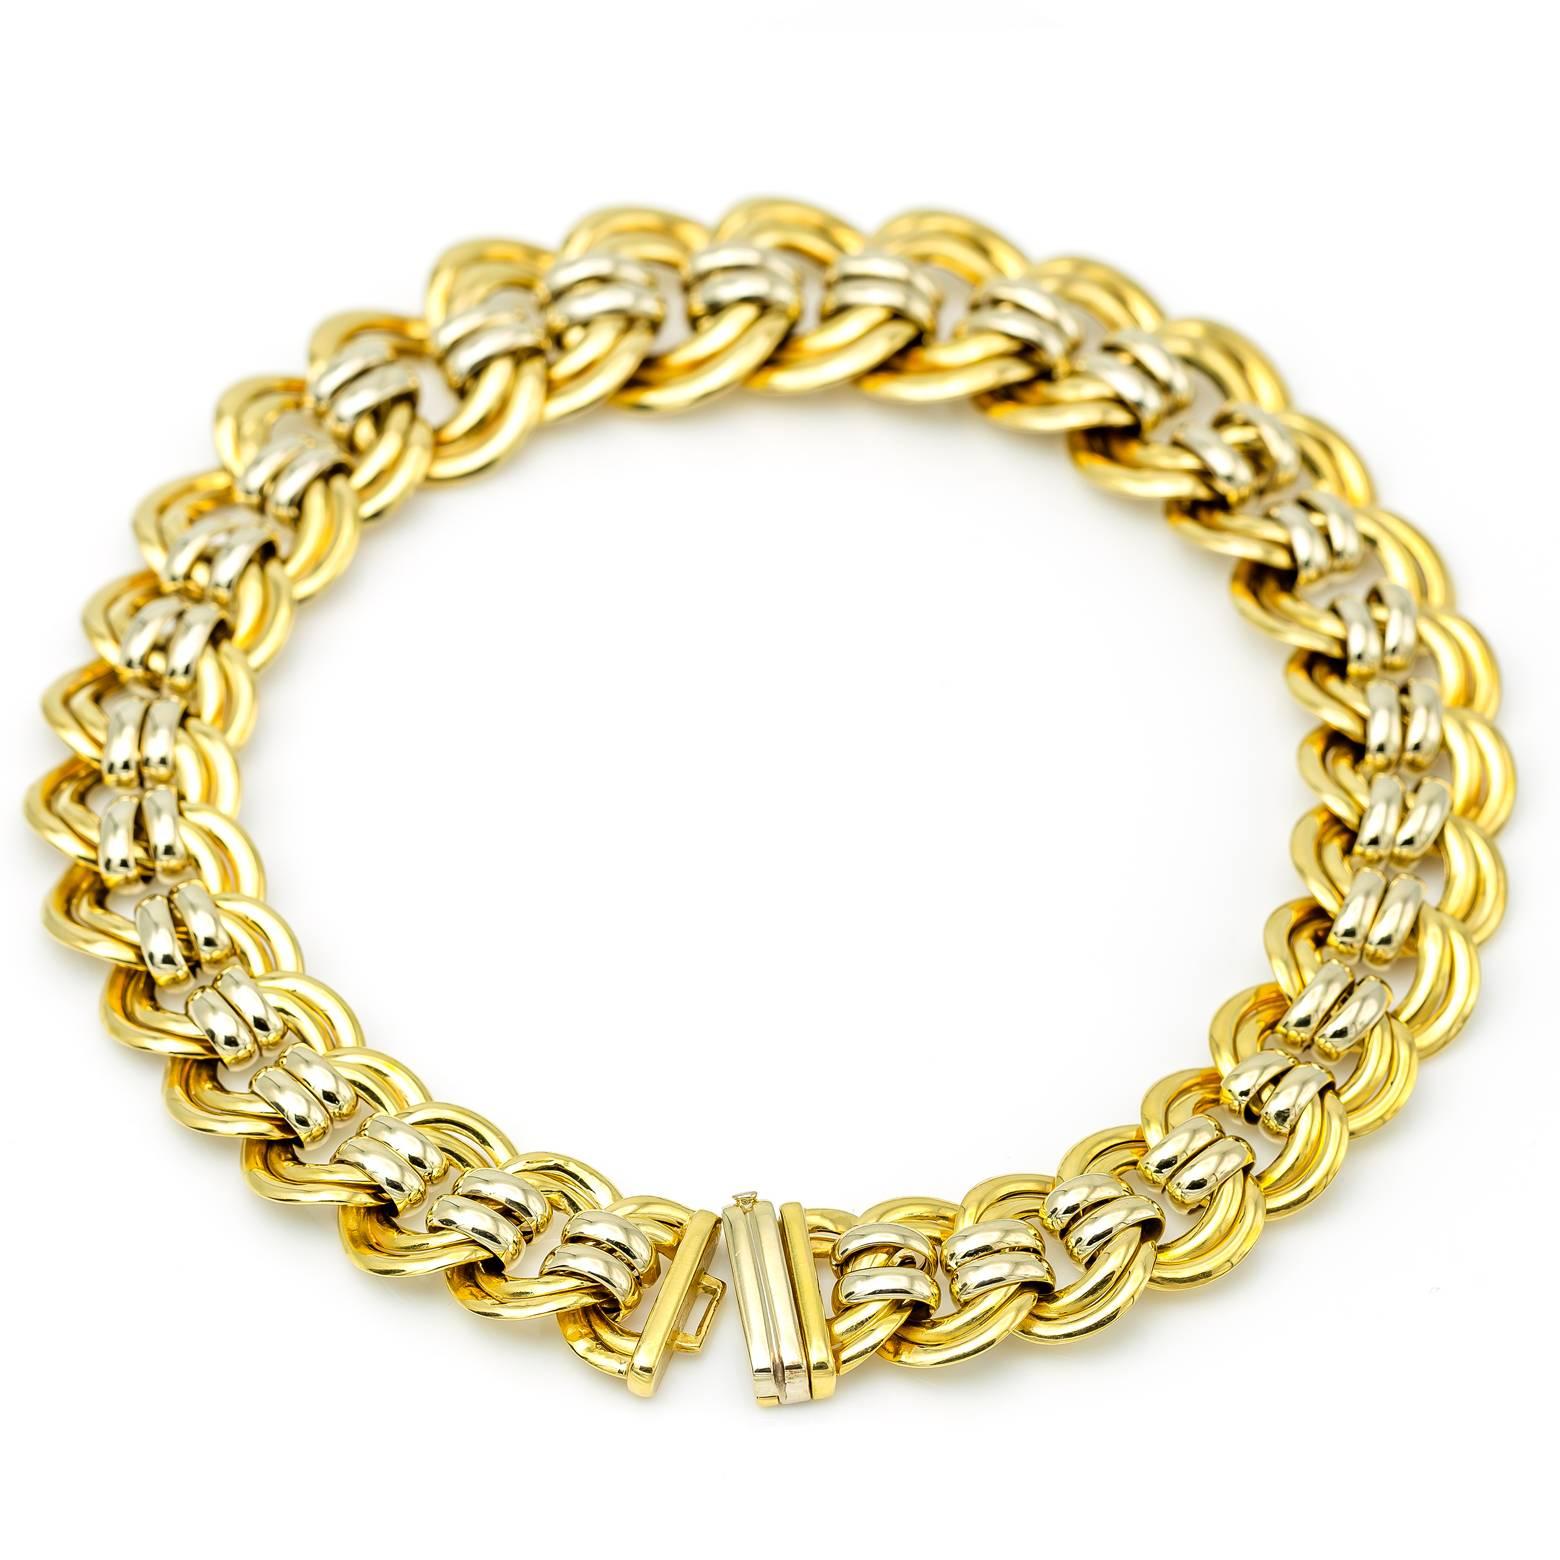 Modern Large Gold Chain Link Choker Necklace